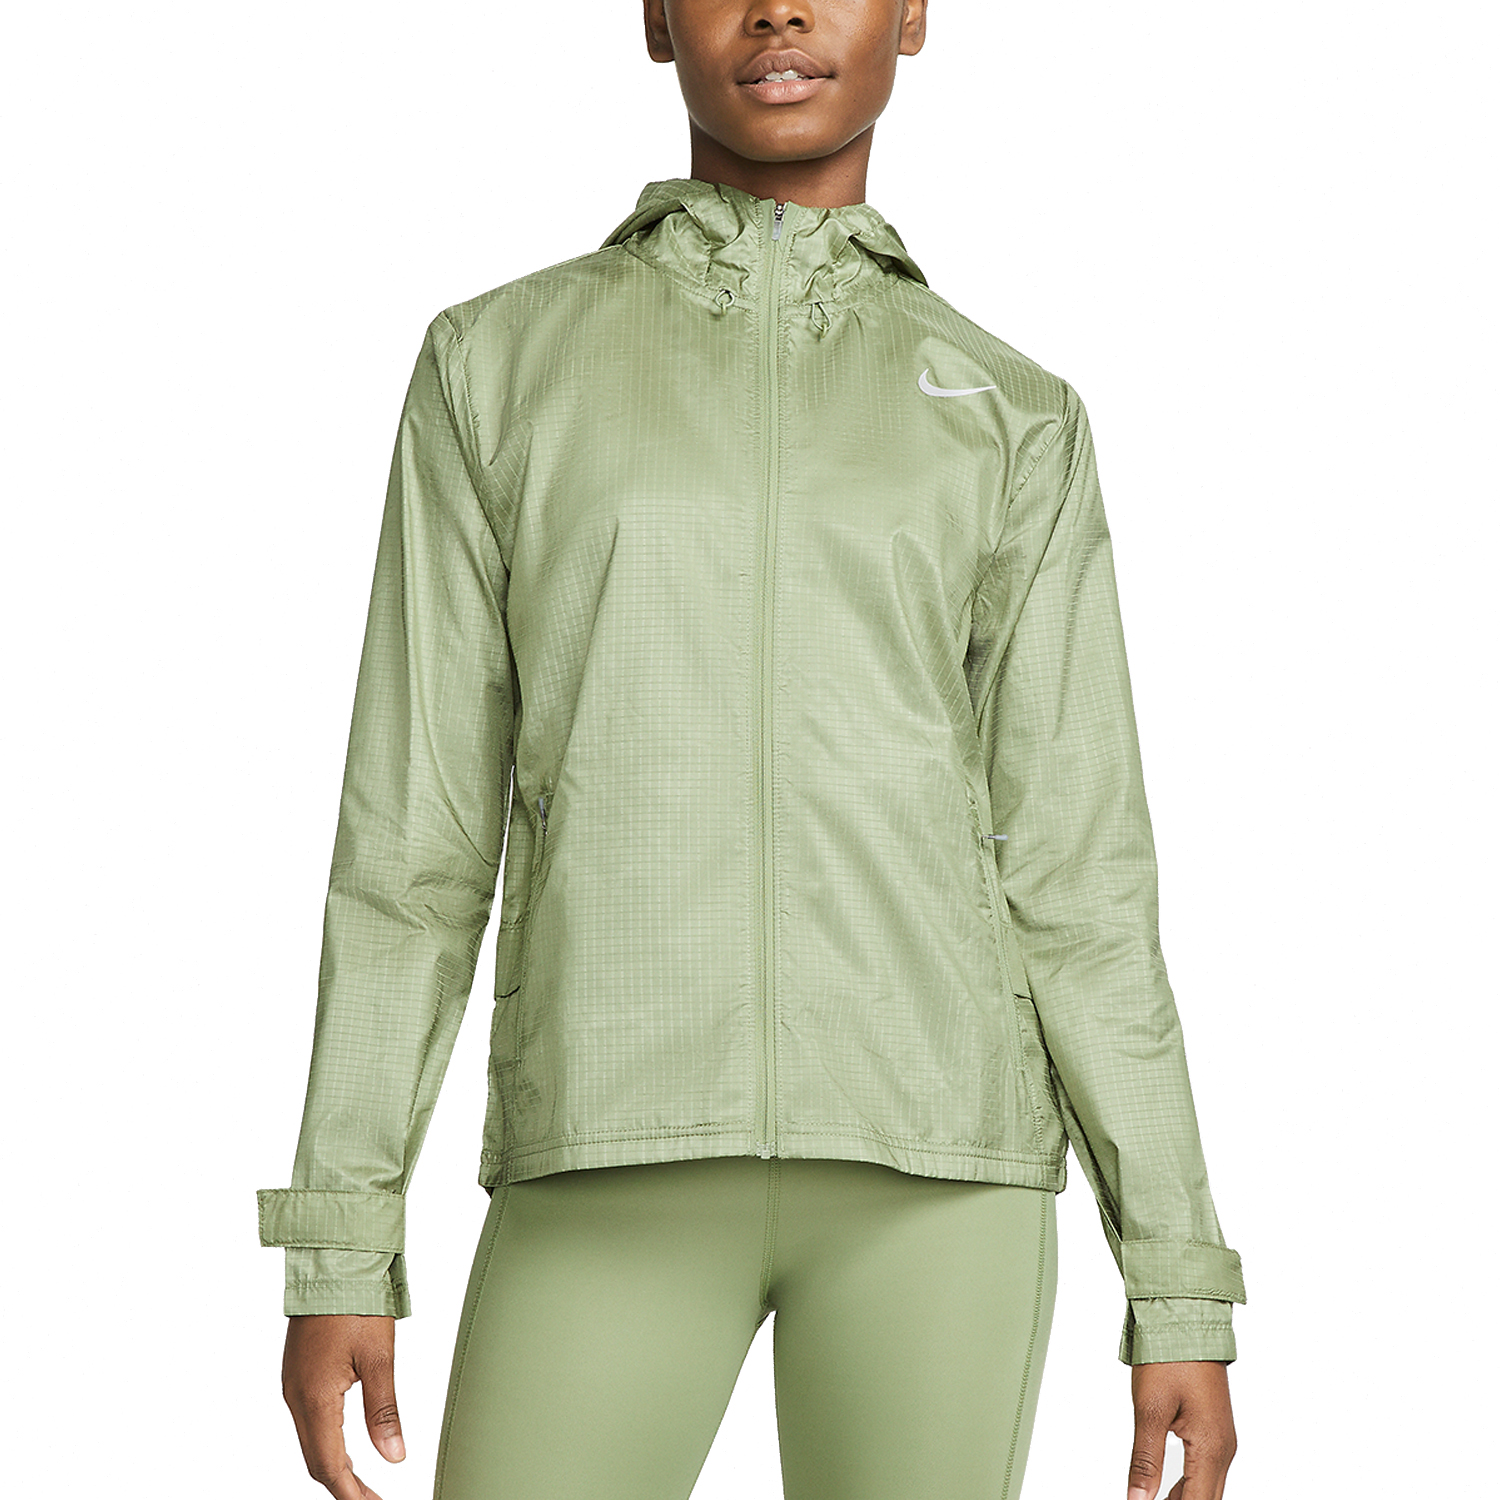 Nike Essential Jacket - Oil Green/Reflective Silver